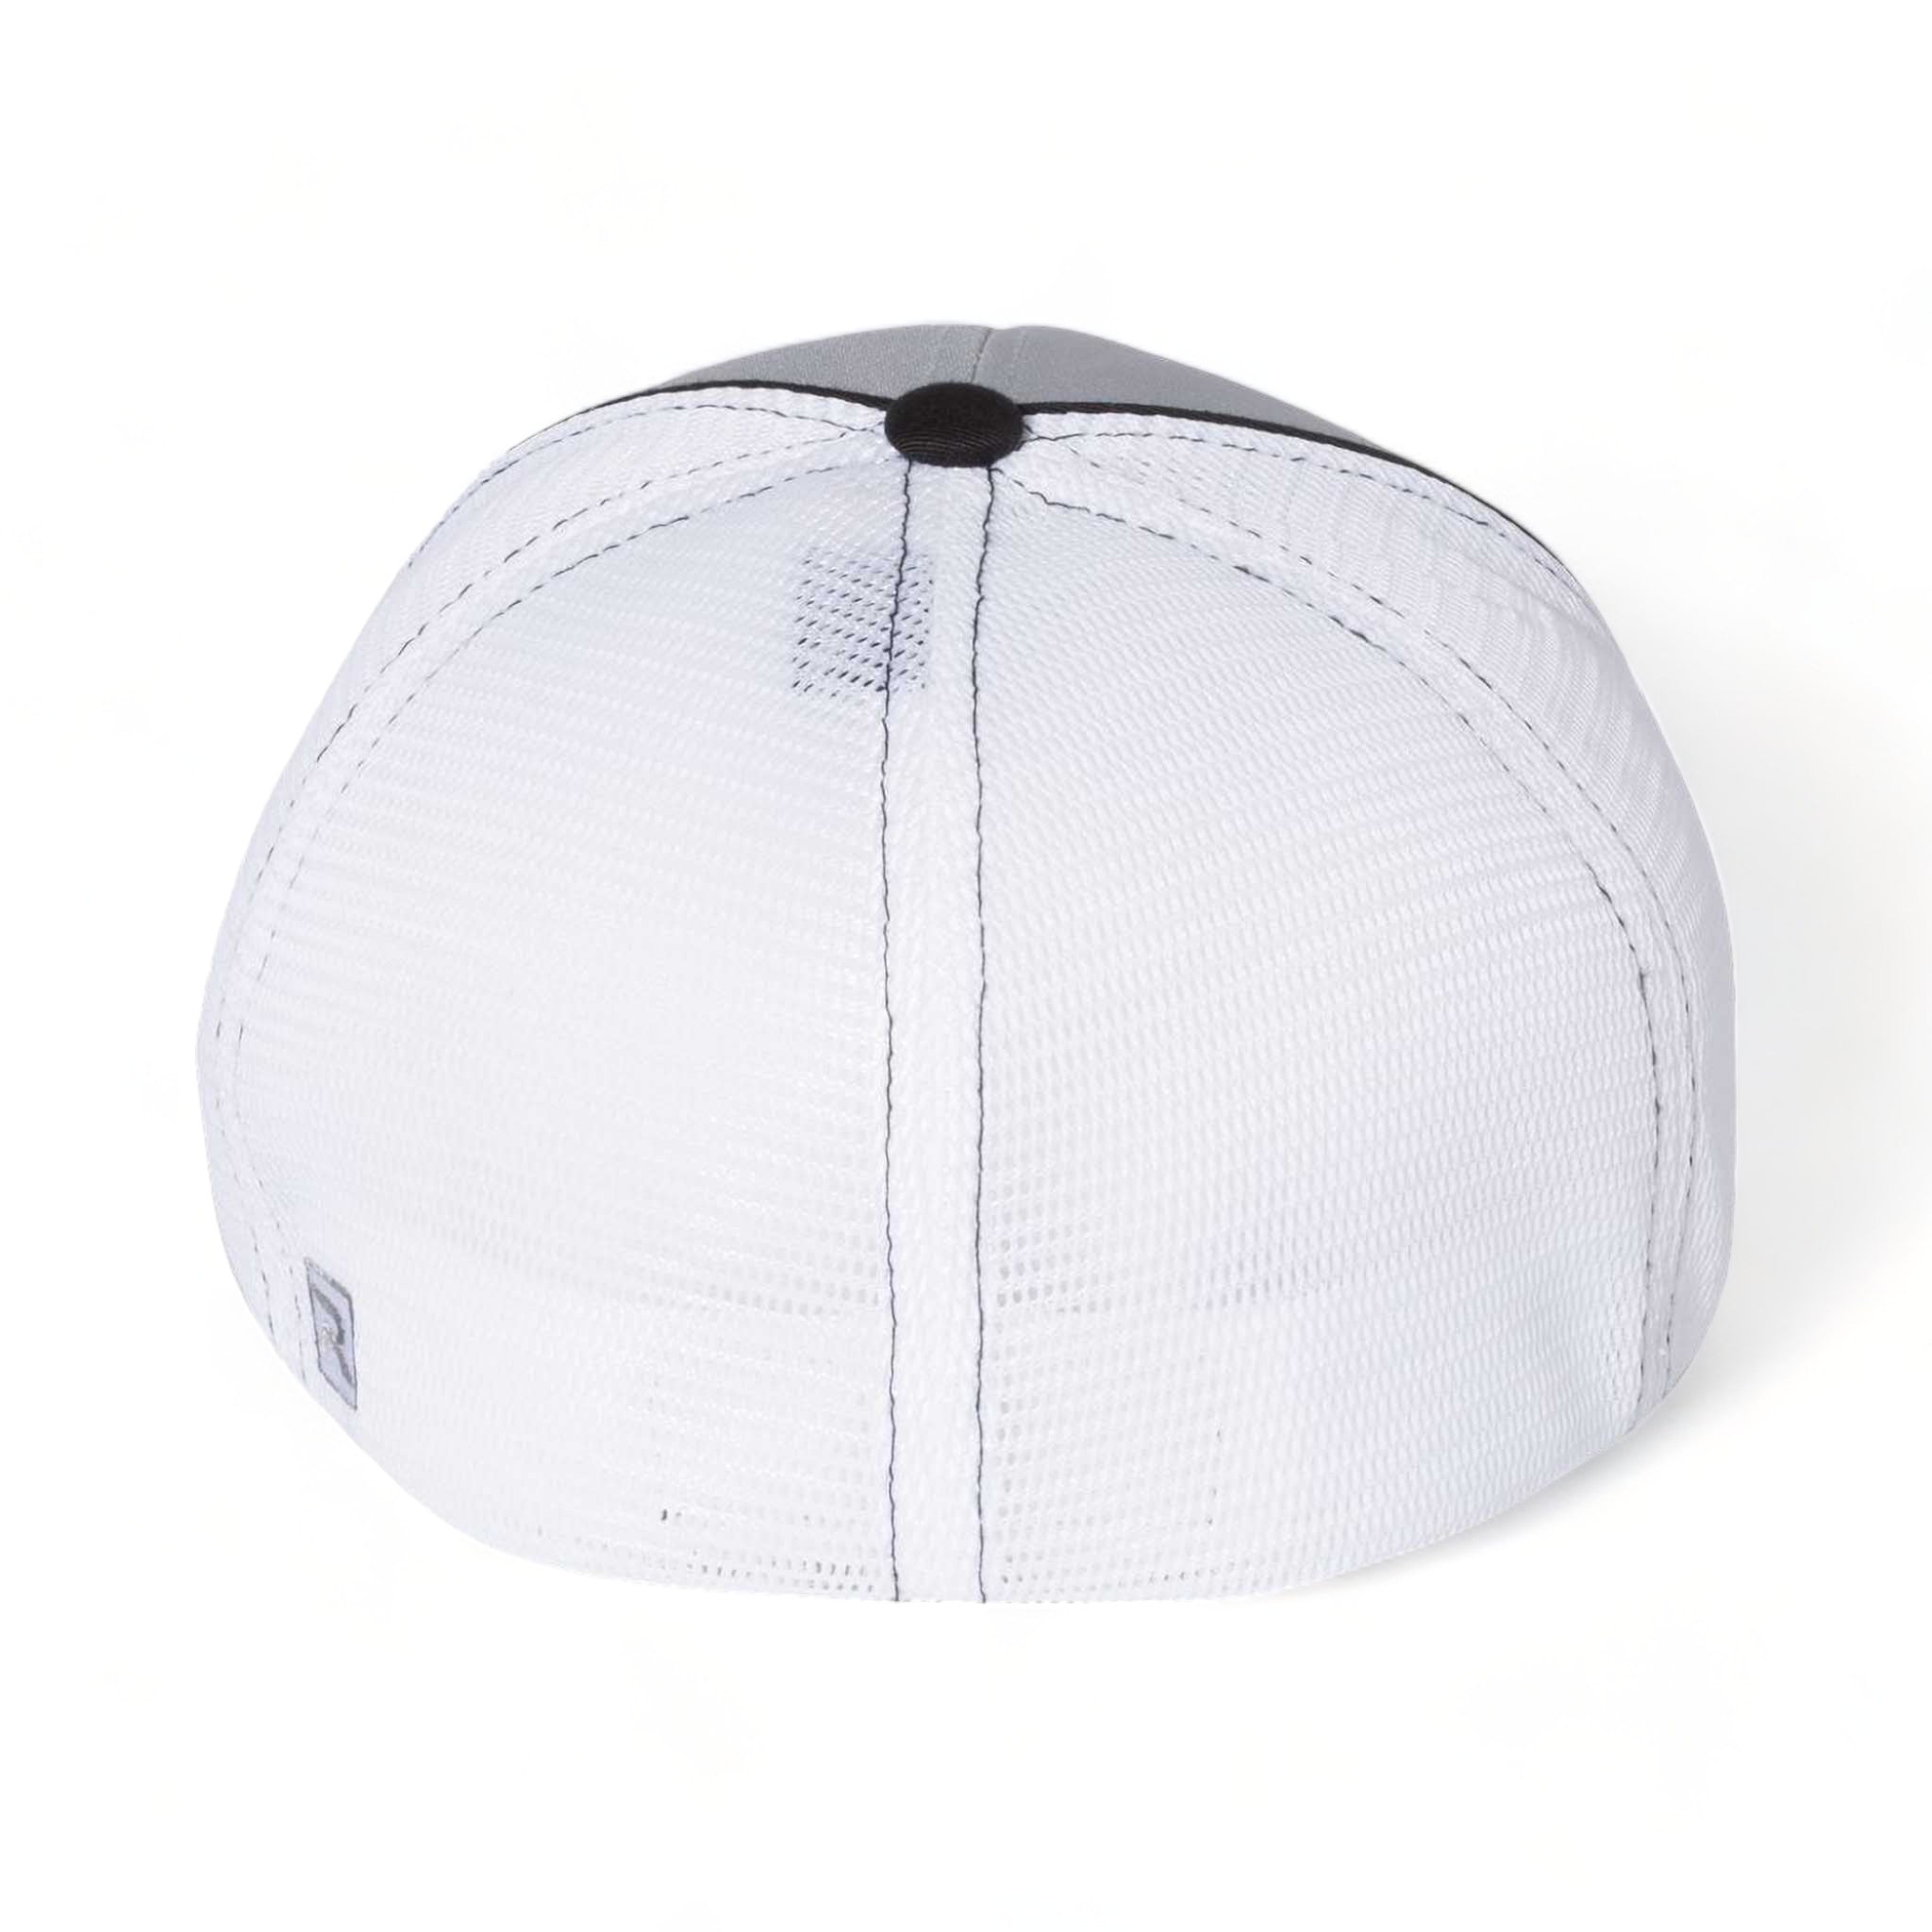 Back view of Richardson 172 custom hat in grey, white and black tri